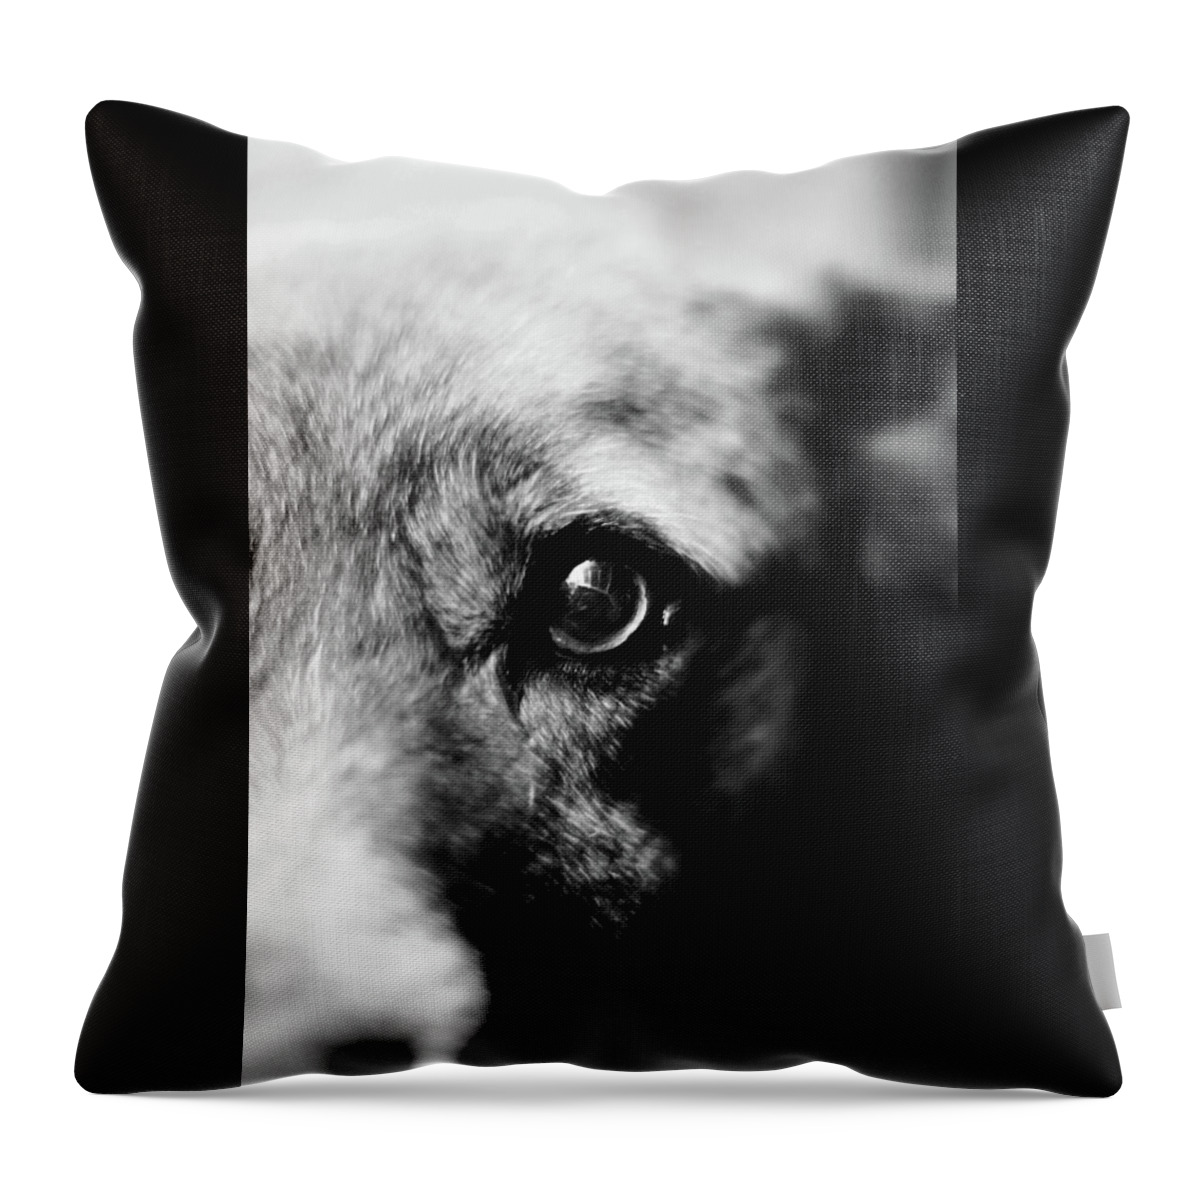 Taters Throw Pillow featuring the photograph Taters Eye by Sandra Dalton